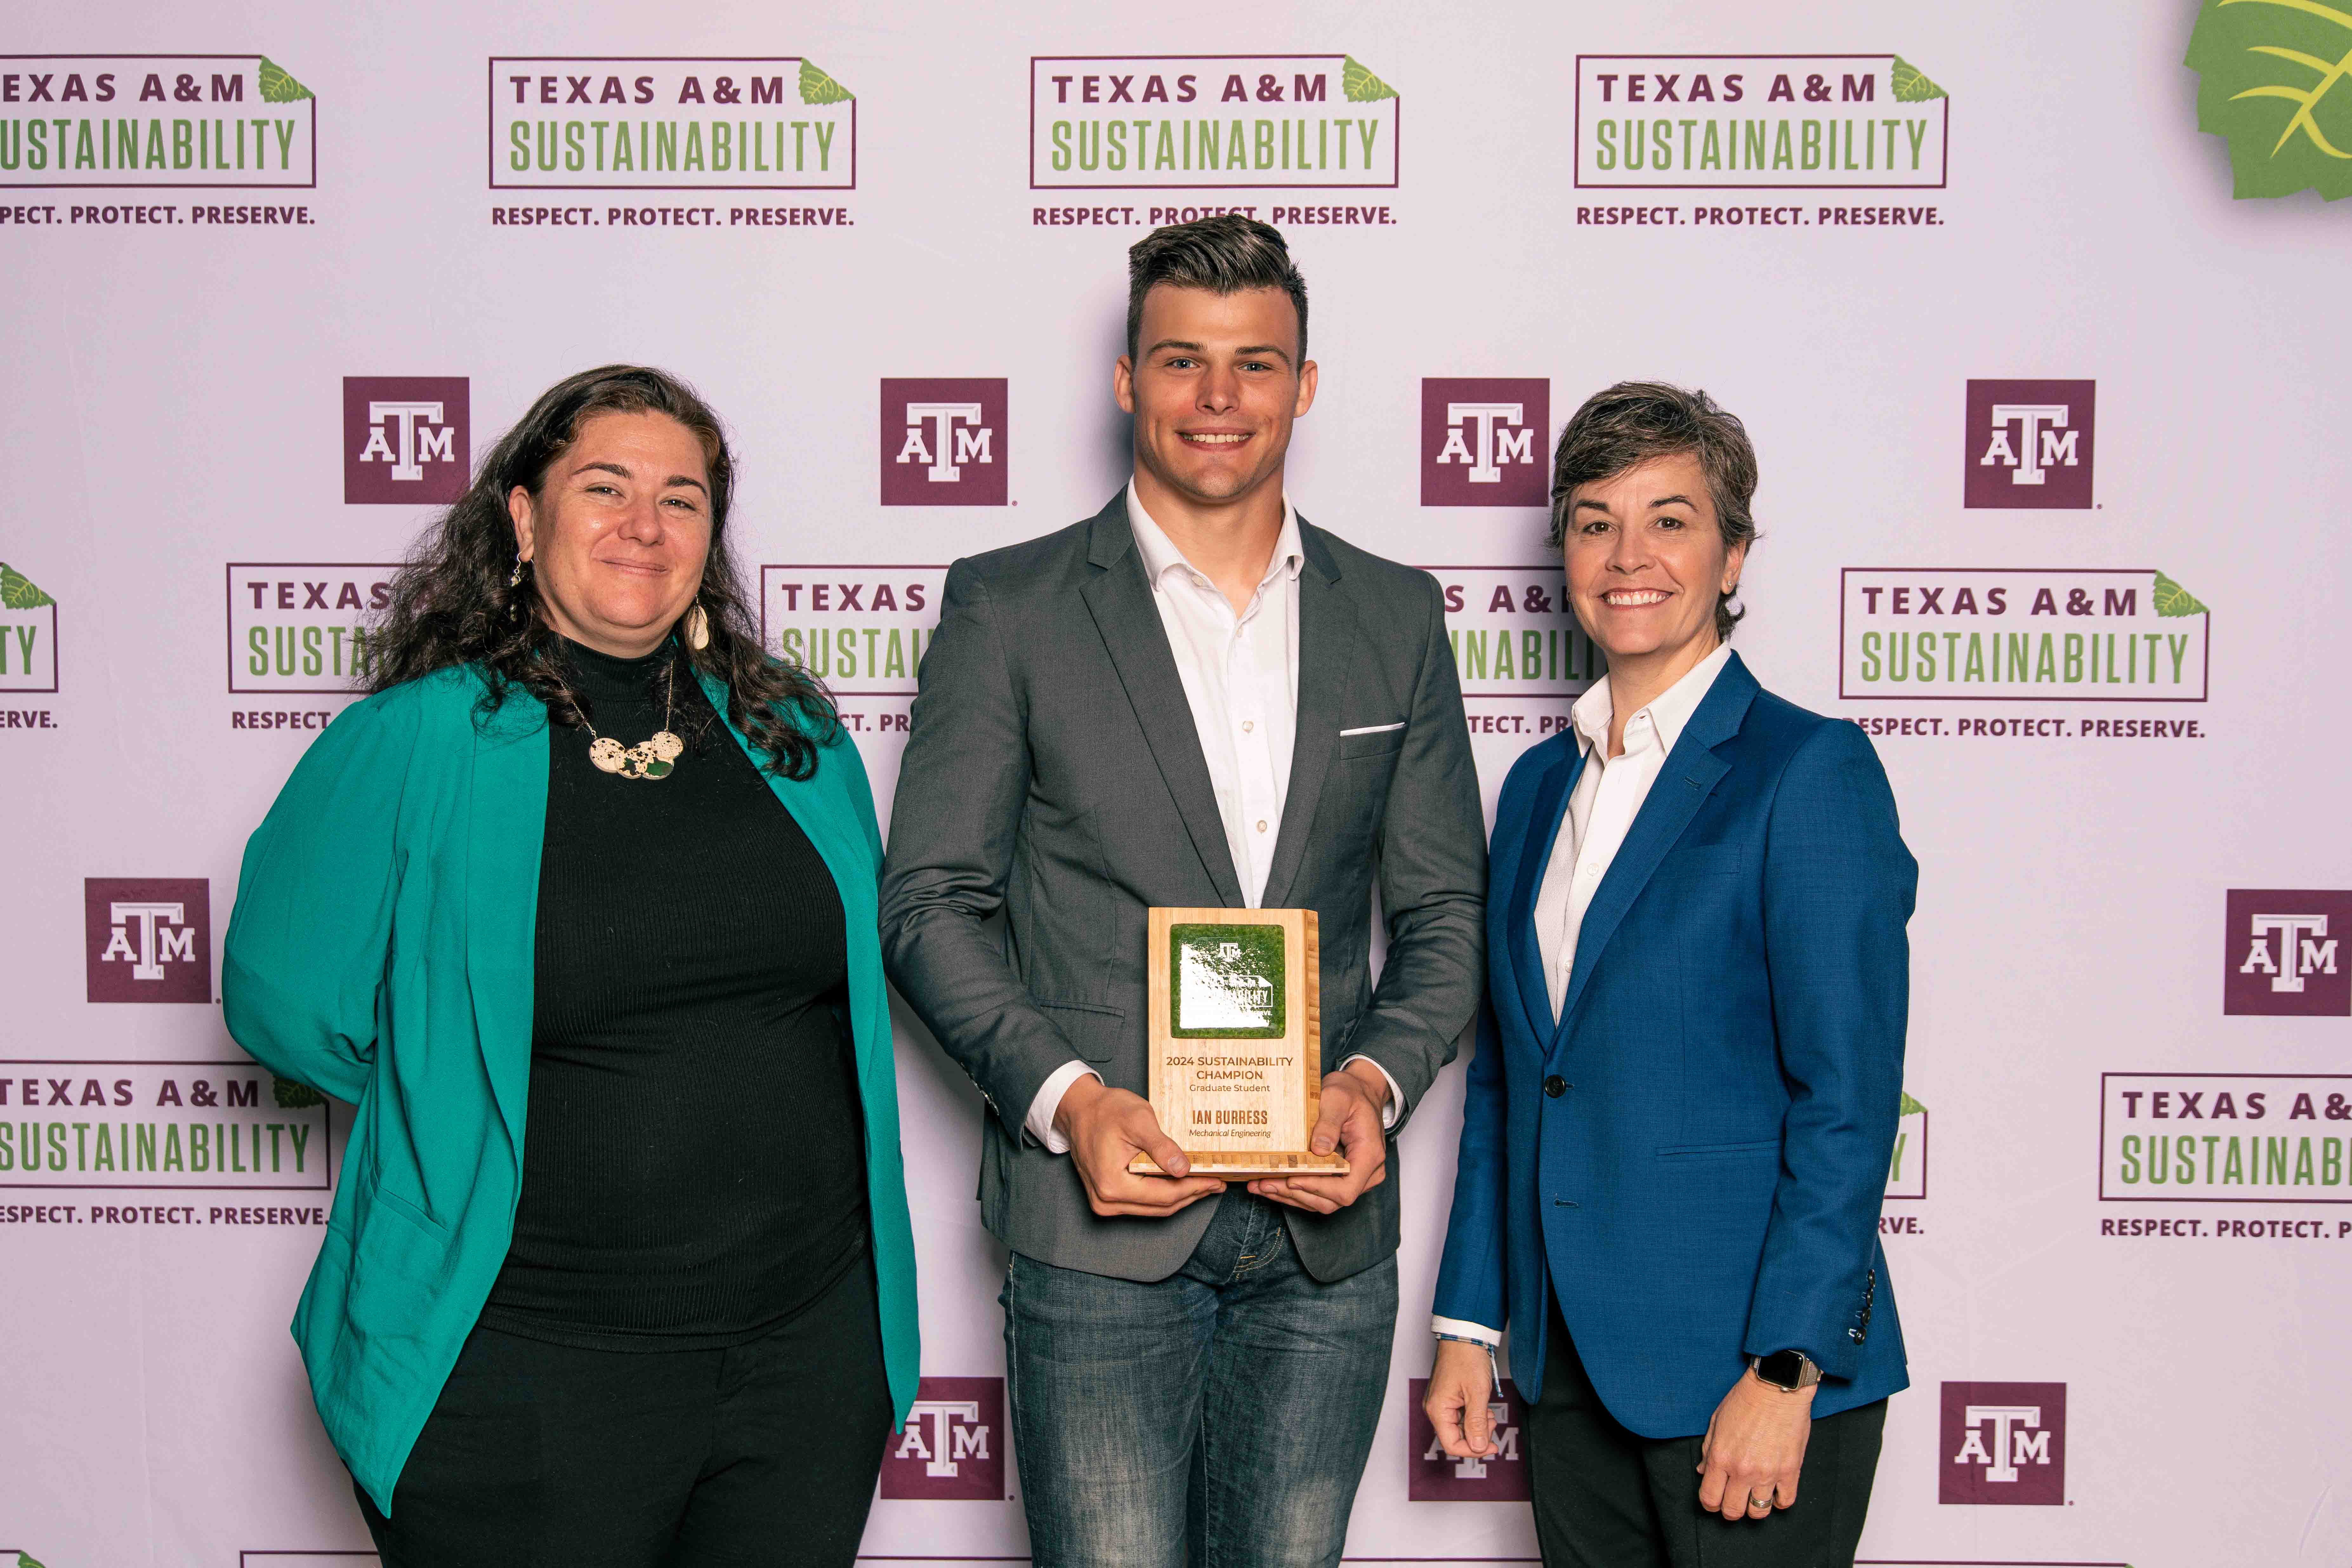 Ian Burress accepting the Sustainability Champion Graduate Award with Kelly Wellman and Ben Kalscheur